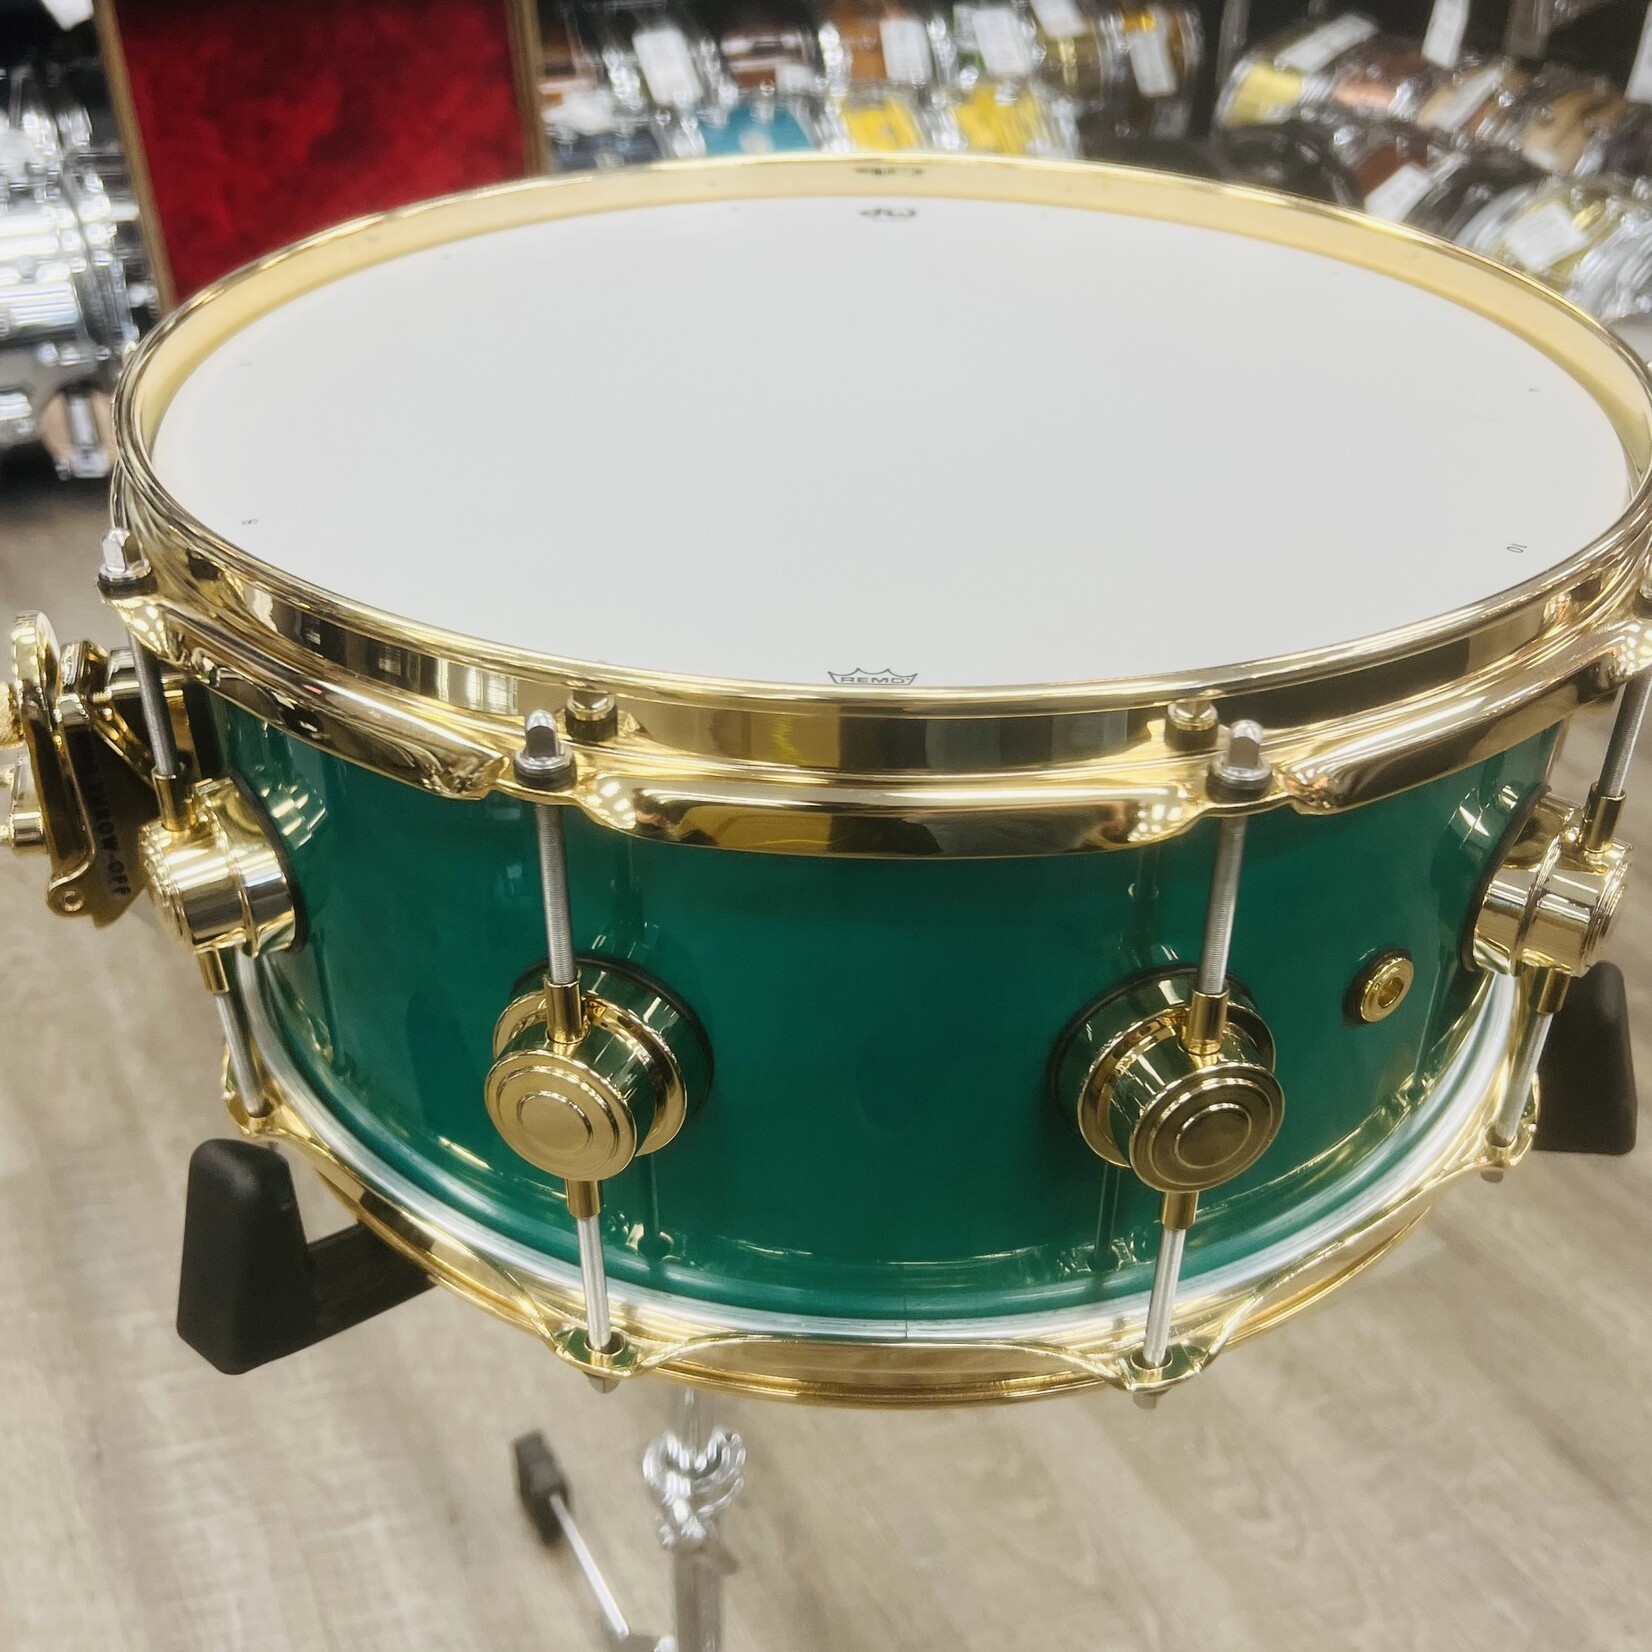 DW DW Jazz Series Mahogany/Gum Lacquer Custom 6x14" (Turquoise Blue w/ Gold Hardware)